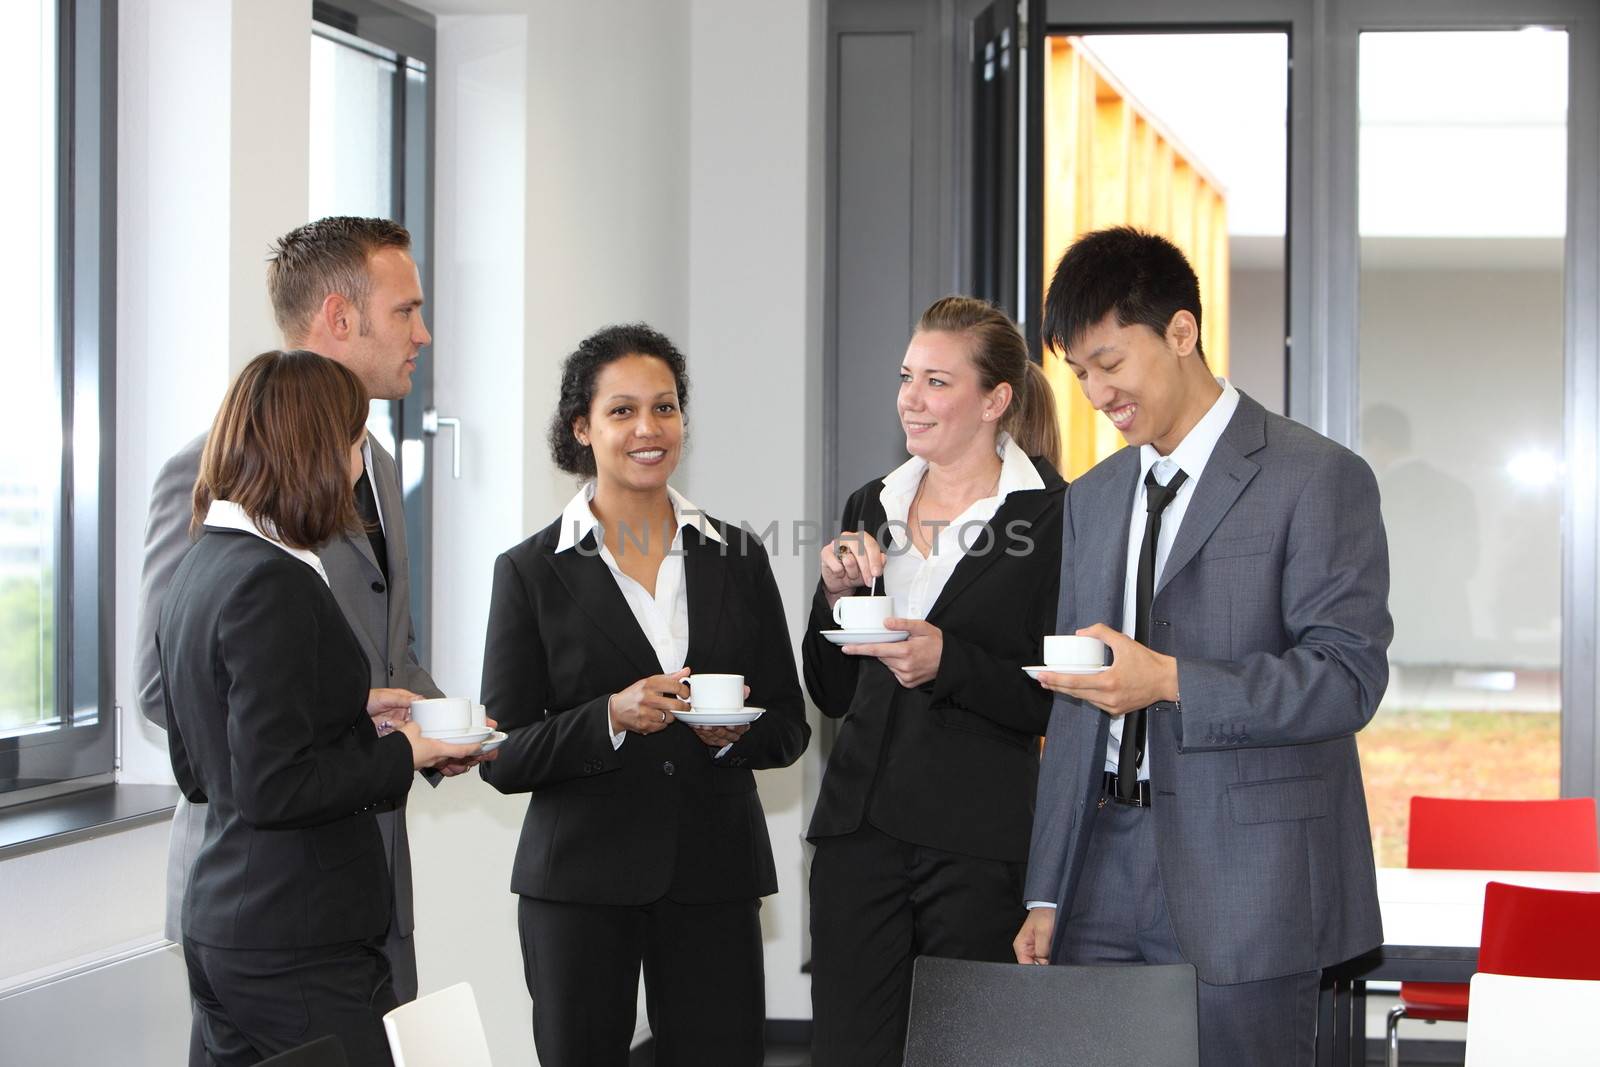 Group of diverse multiethnic businesspeople on coffee break with three ladies and two men standing together chatting in smart suits